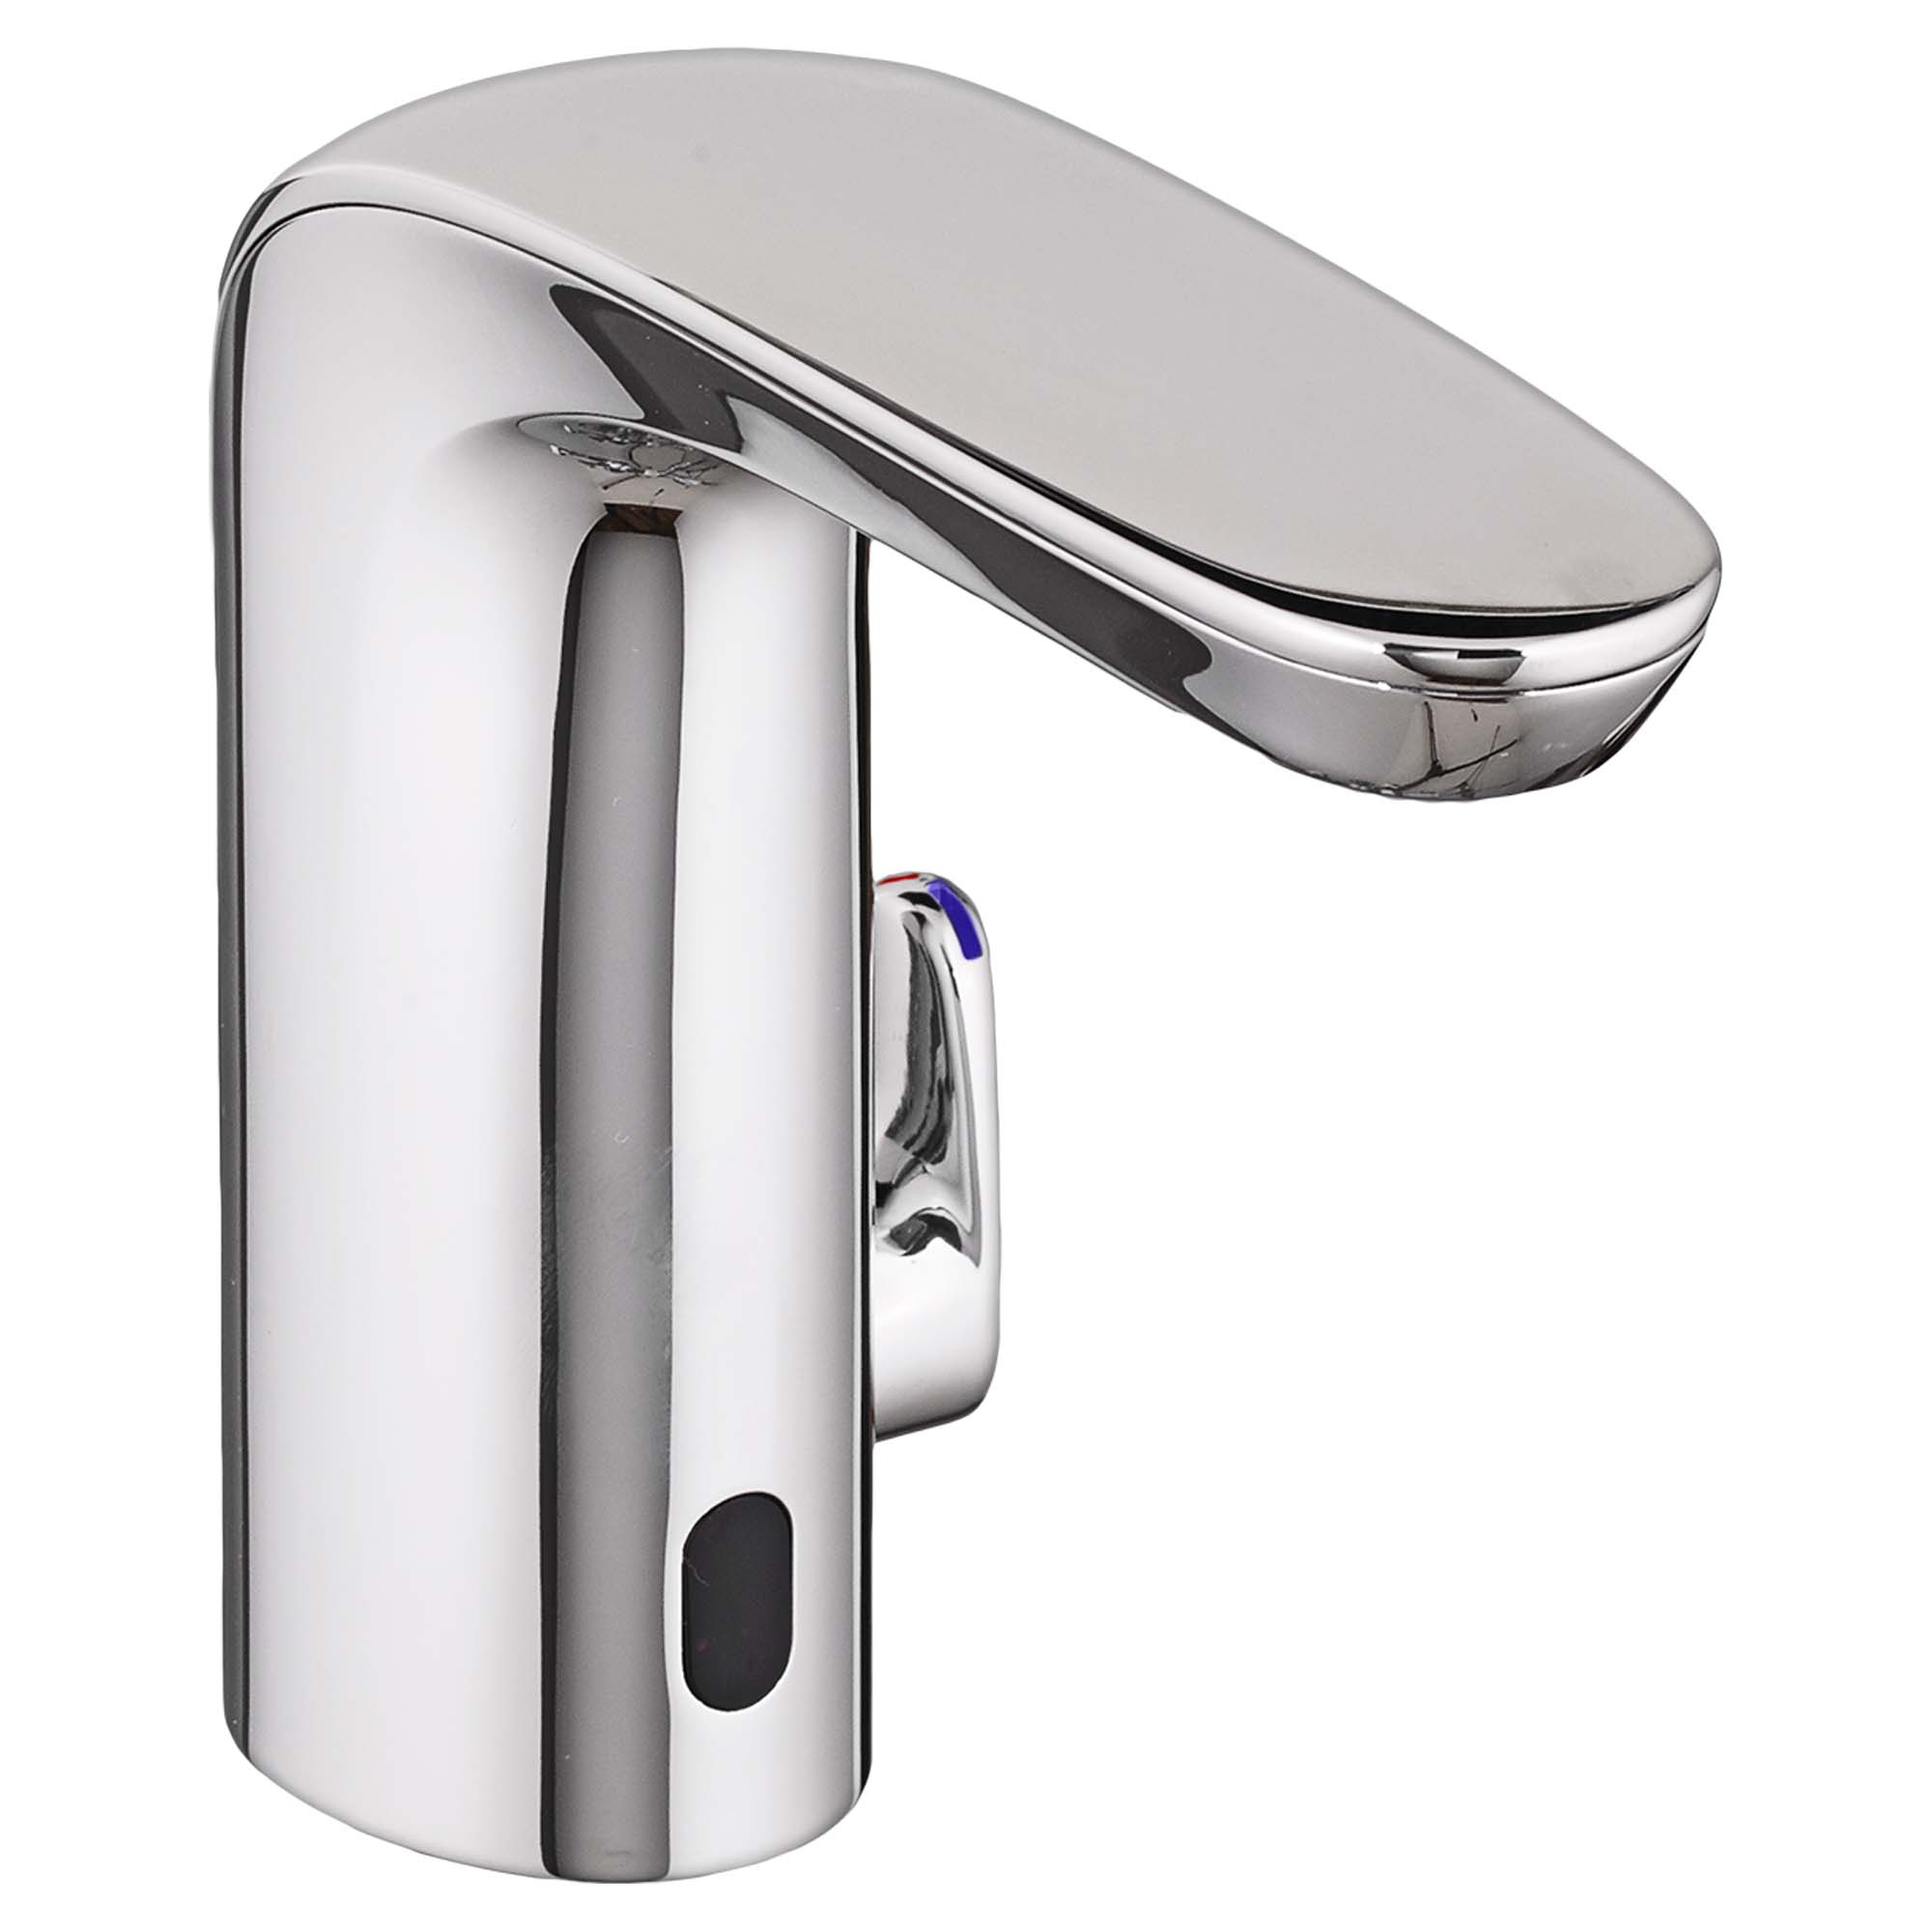 NextGen Selectronic® Touchless Faucet, Battery-Powered With SmarTherm Safety Shut-Off + ADM, 0.35 gpm/1.3 Lpm